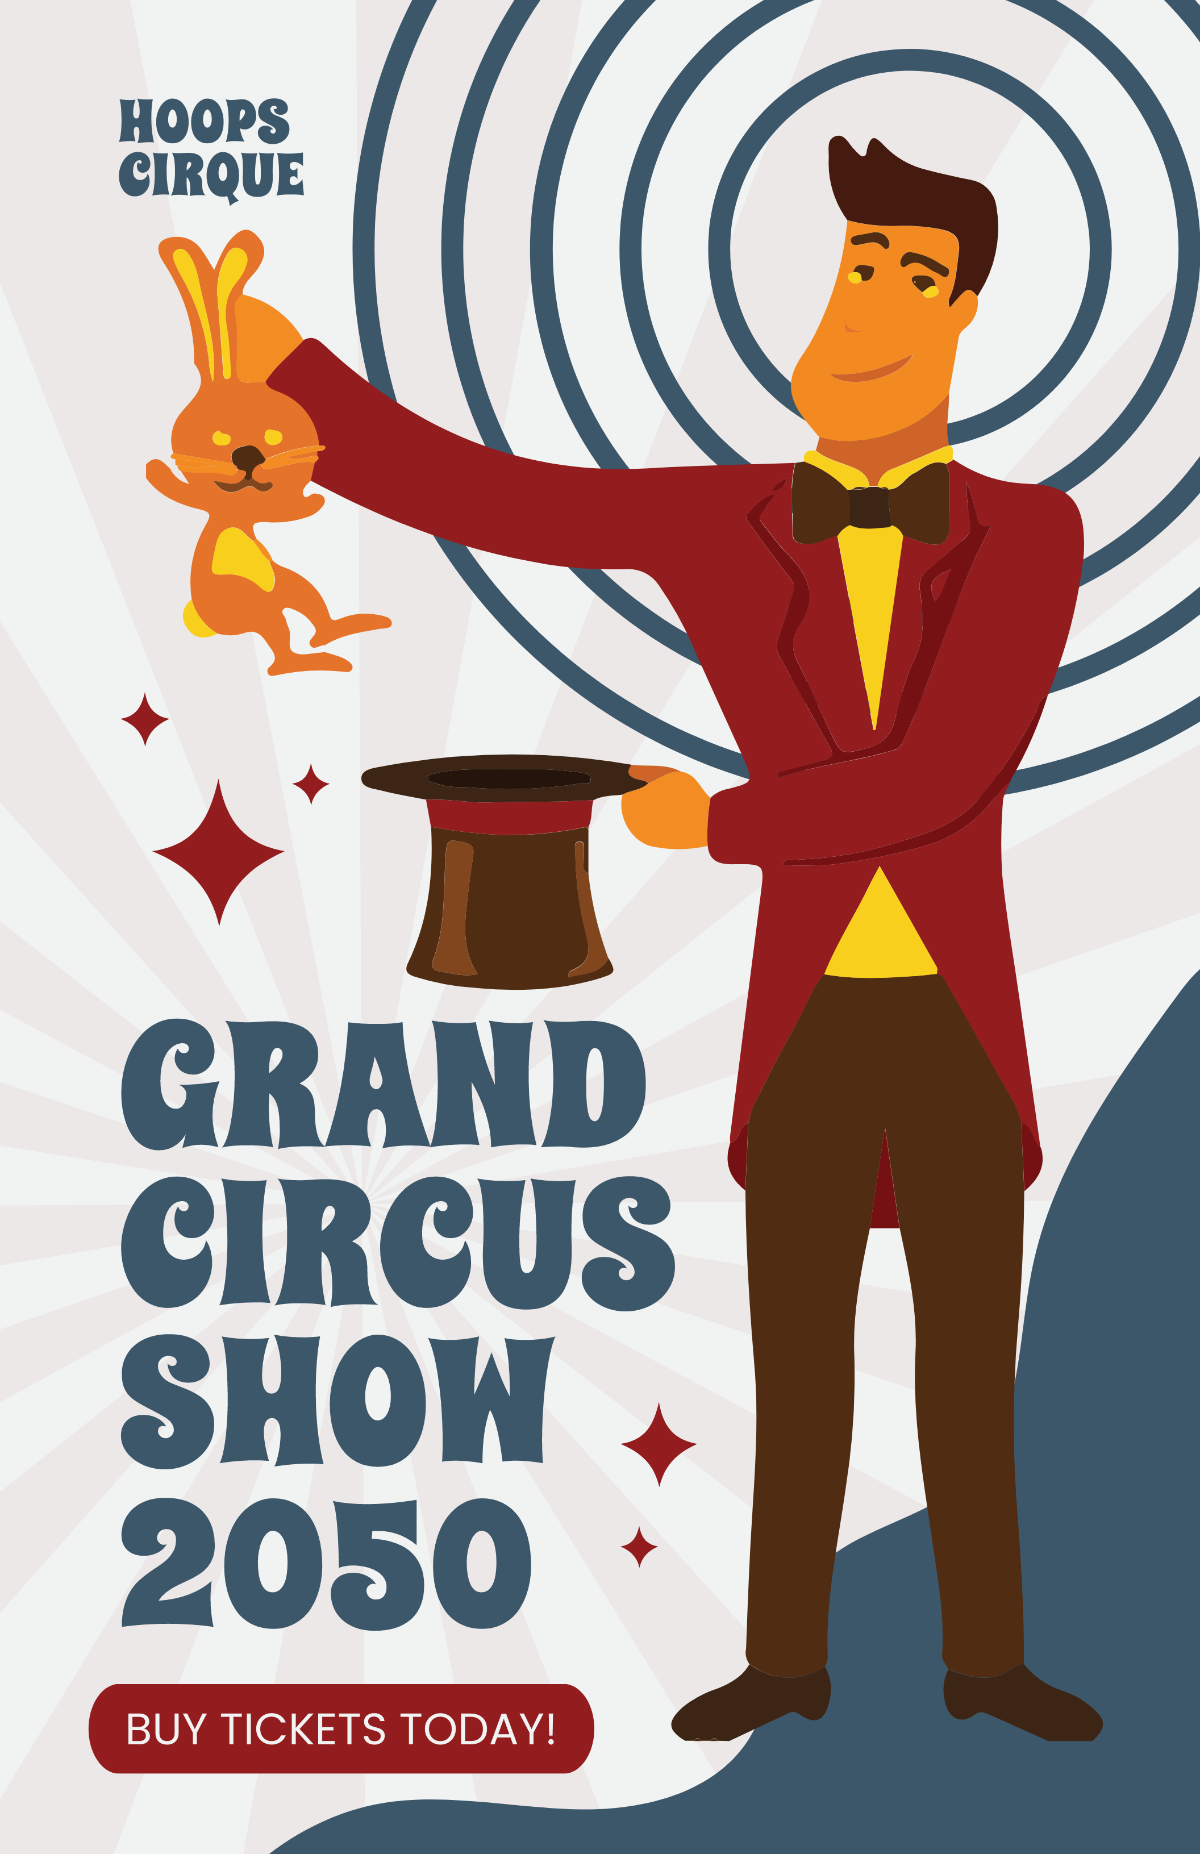 Free Circus Show Poster Template